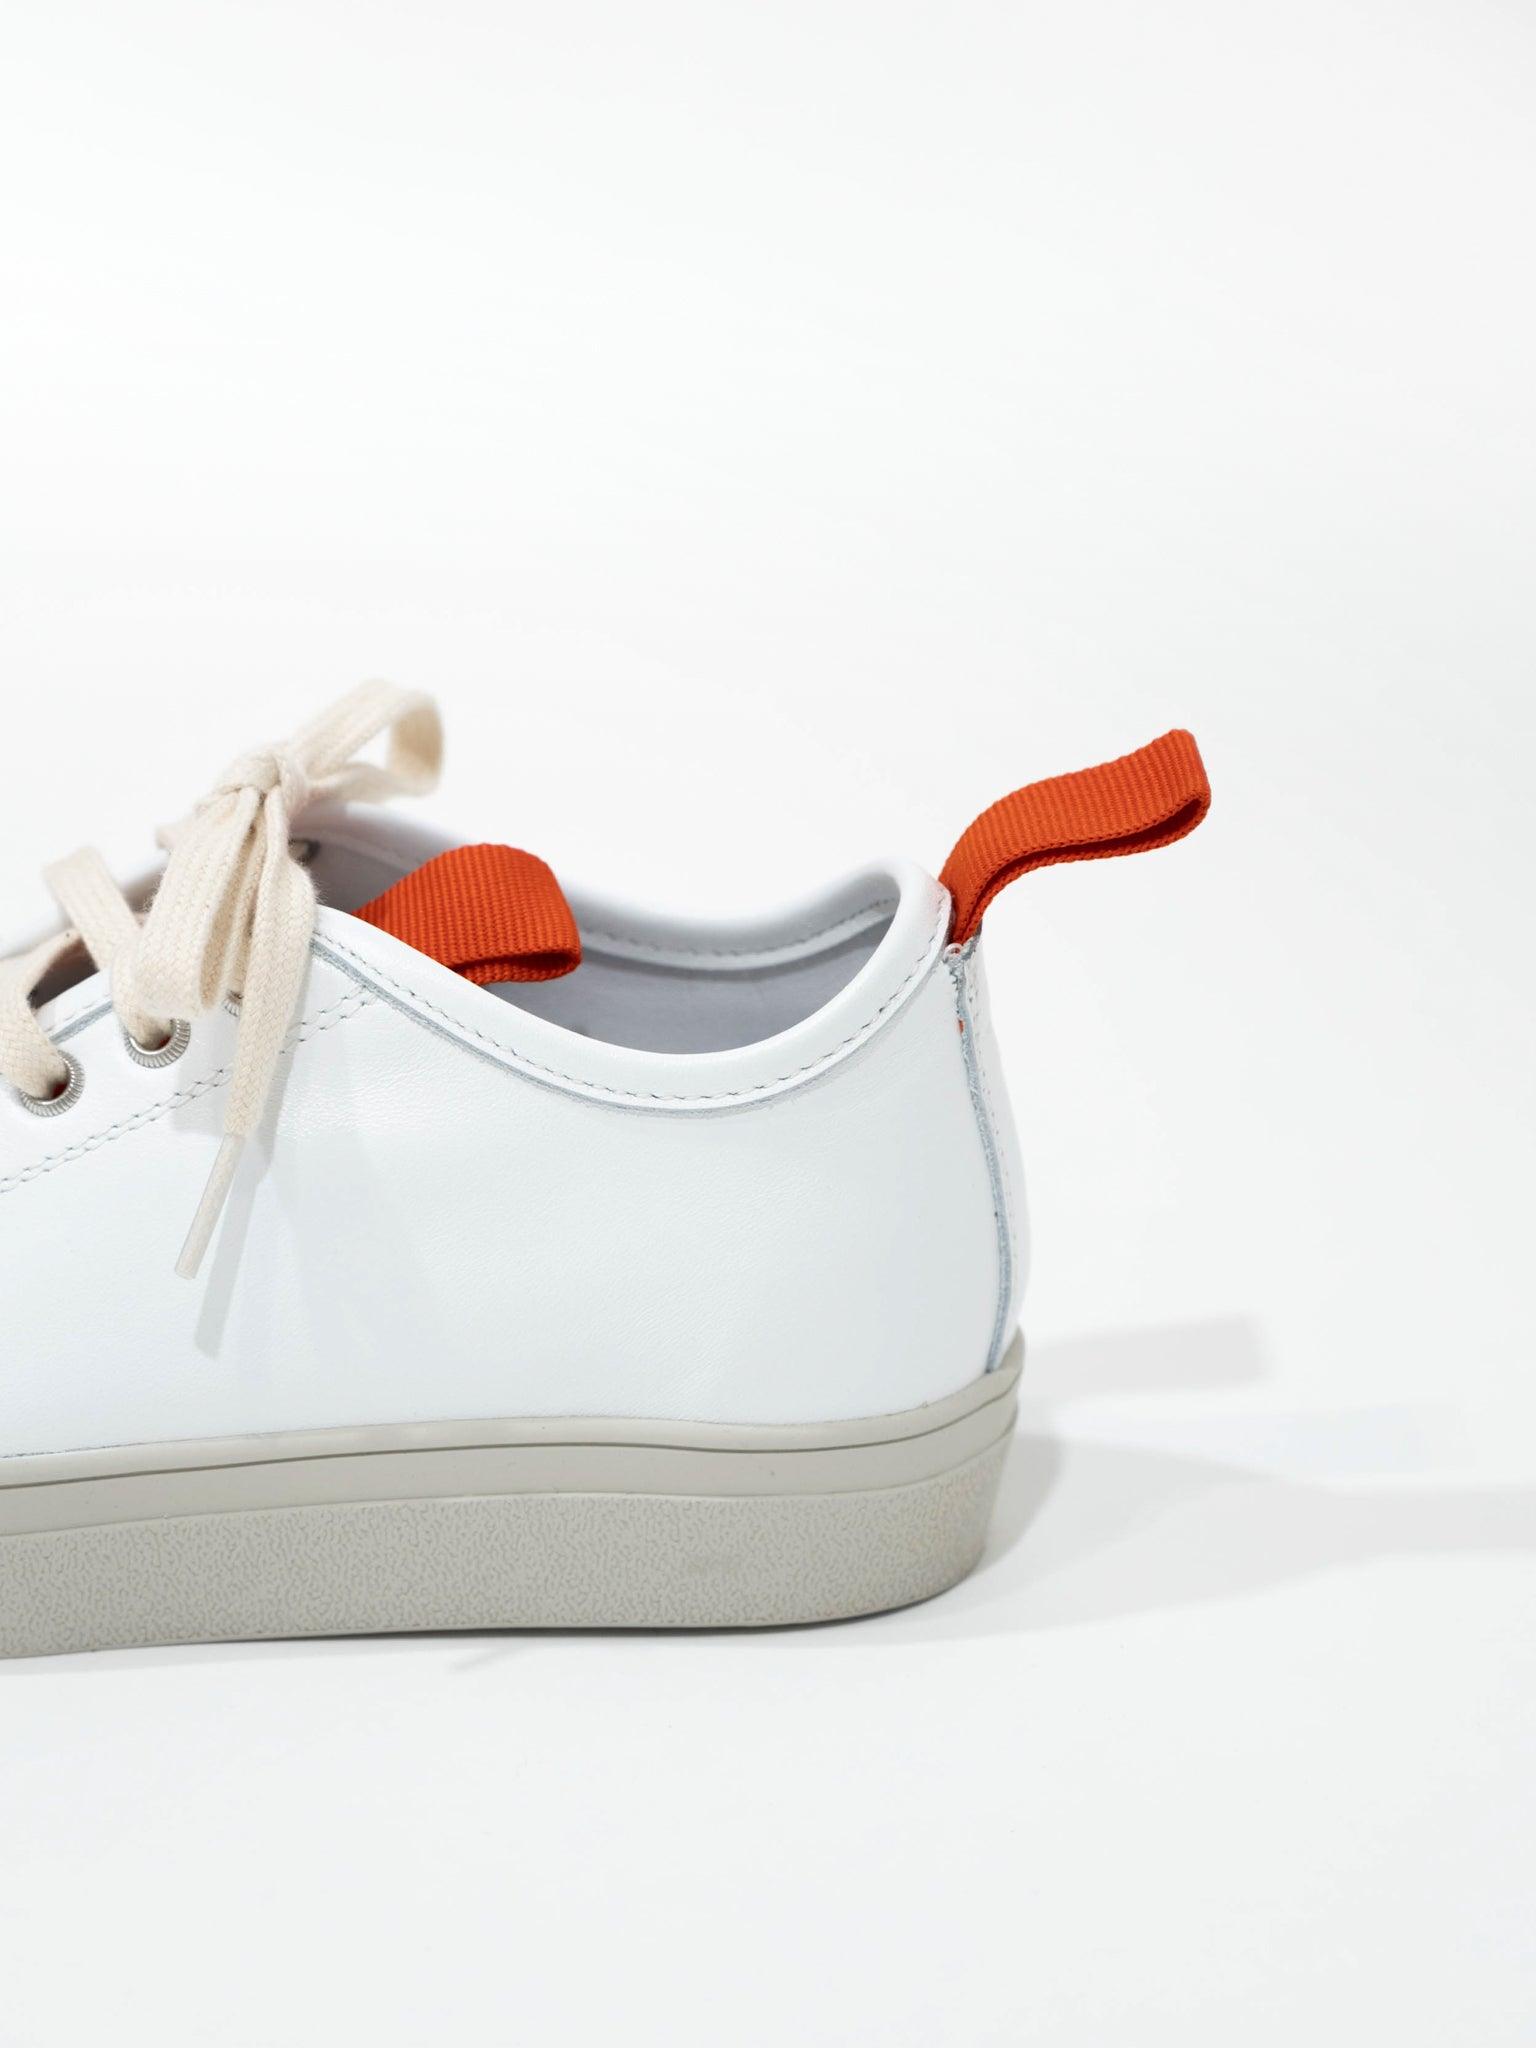 Namu Shop - Sofie D'Hoore Fable Leather Sneakers - White/Clay